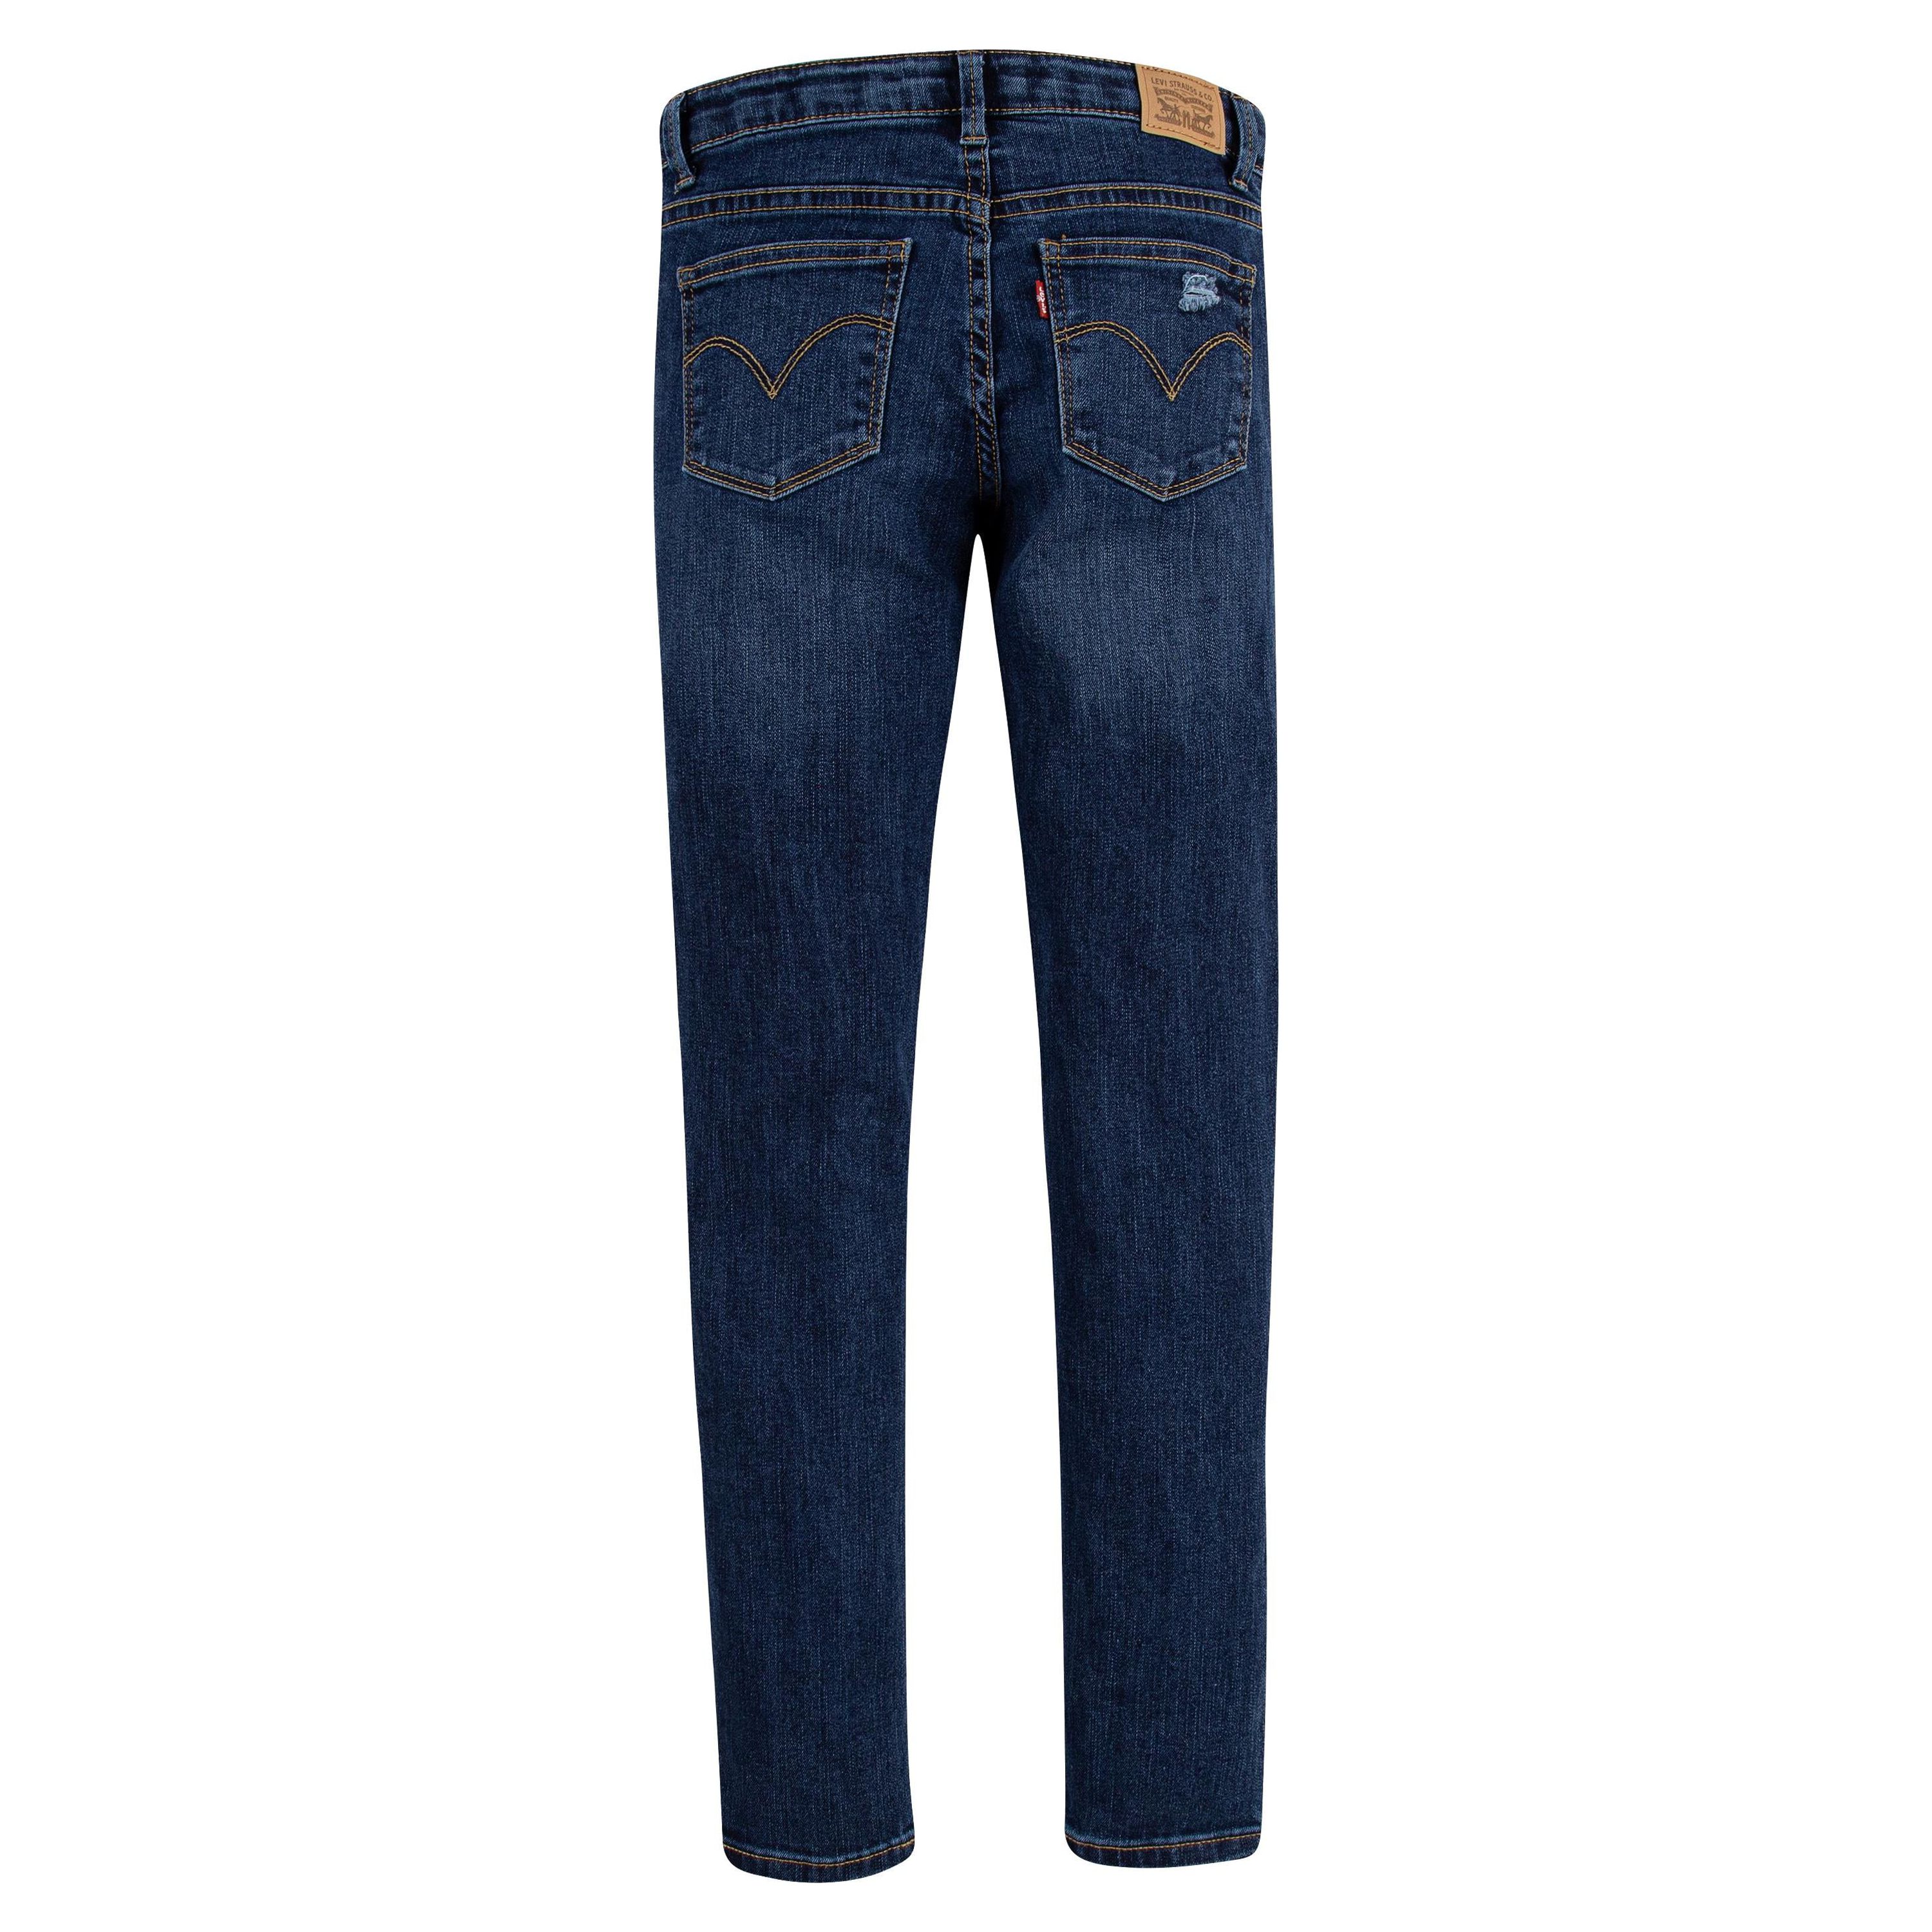 Levi's Girls' 710 Super Skinny Fit Jeans, Sizes 4-16 - image 2 of 6